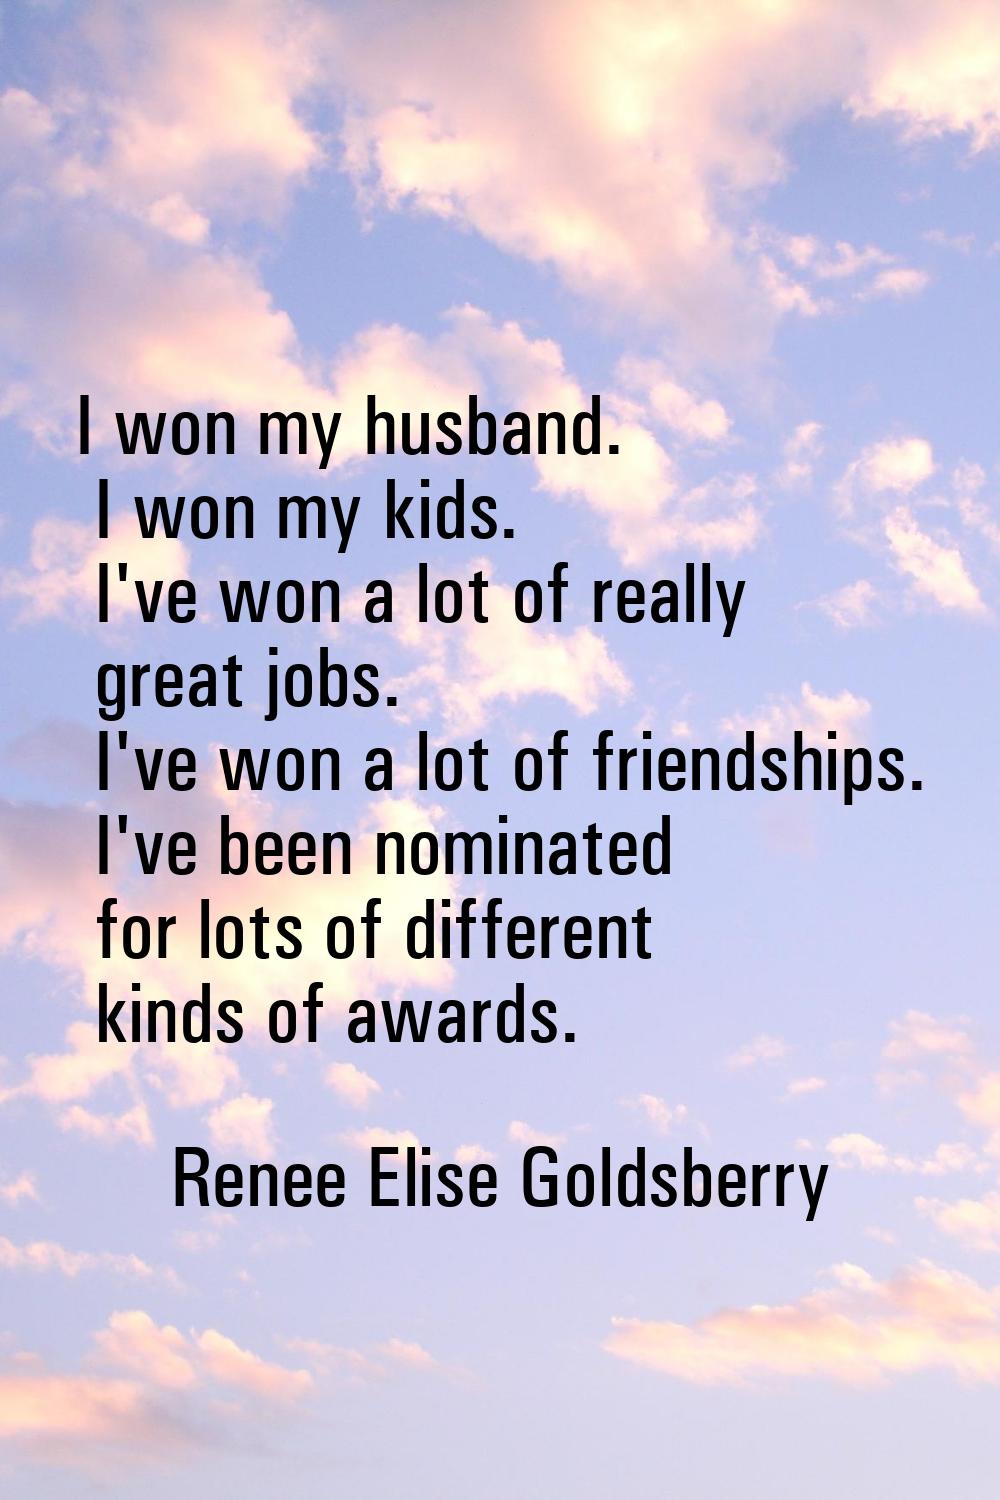 I won my husband. I won my kids. I've won a lot of really great jobs. I've won a lot of friendships